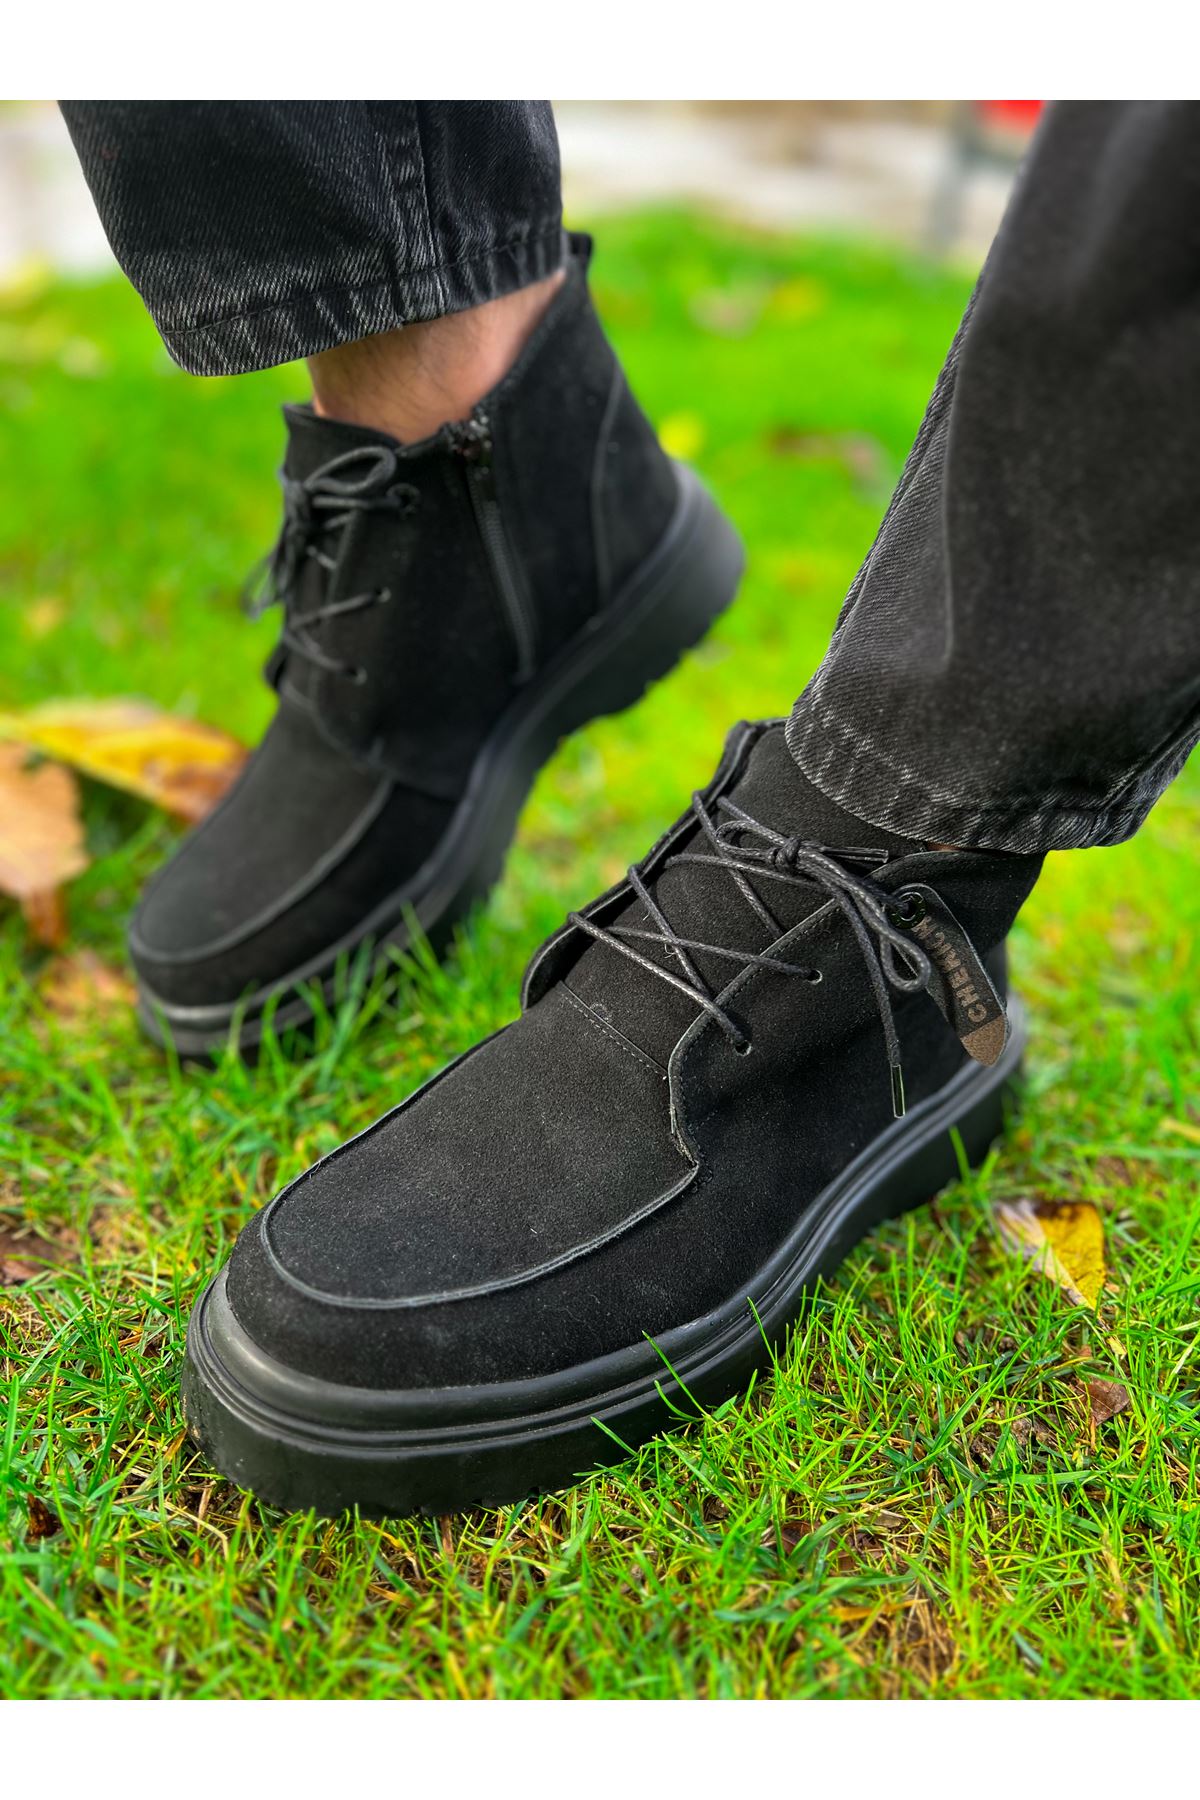 CH 213 Men's Boots BLACK Suede - STREETMODE ™